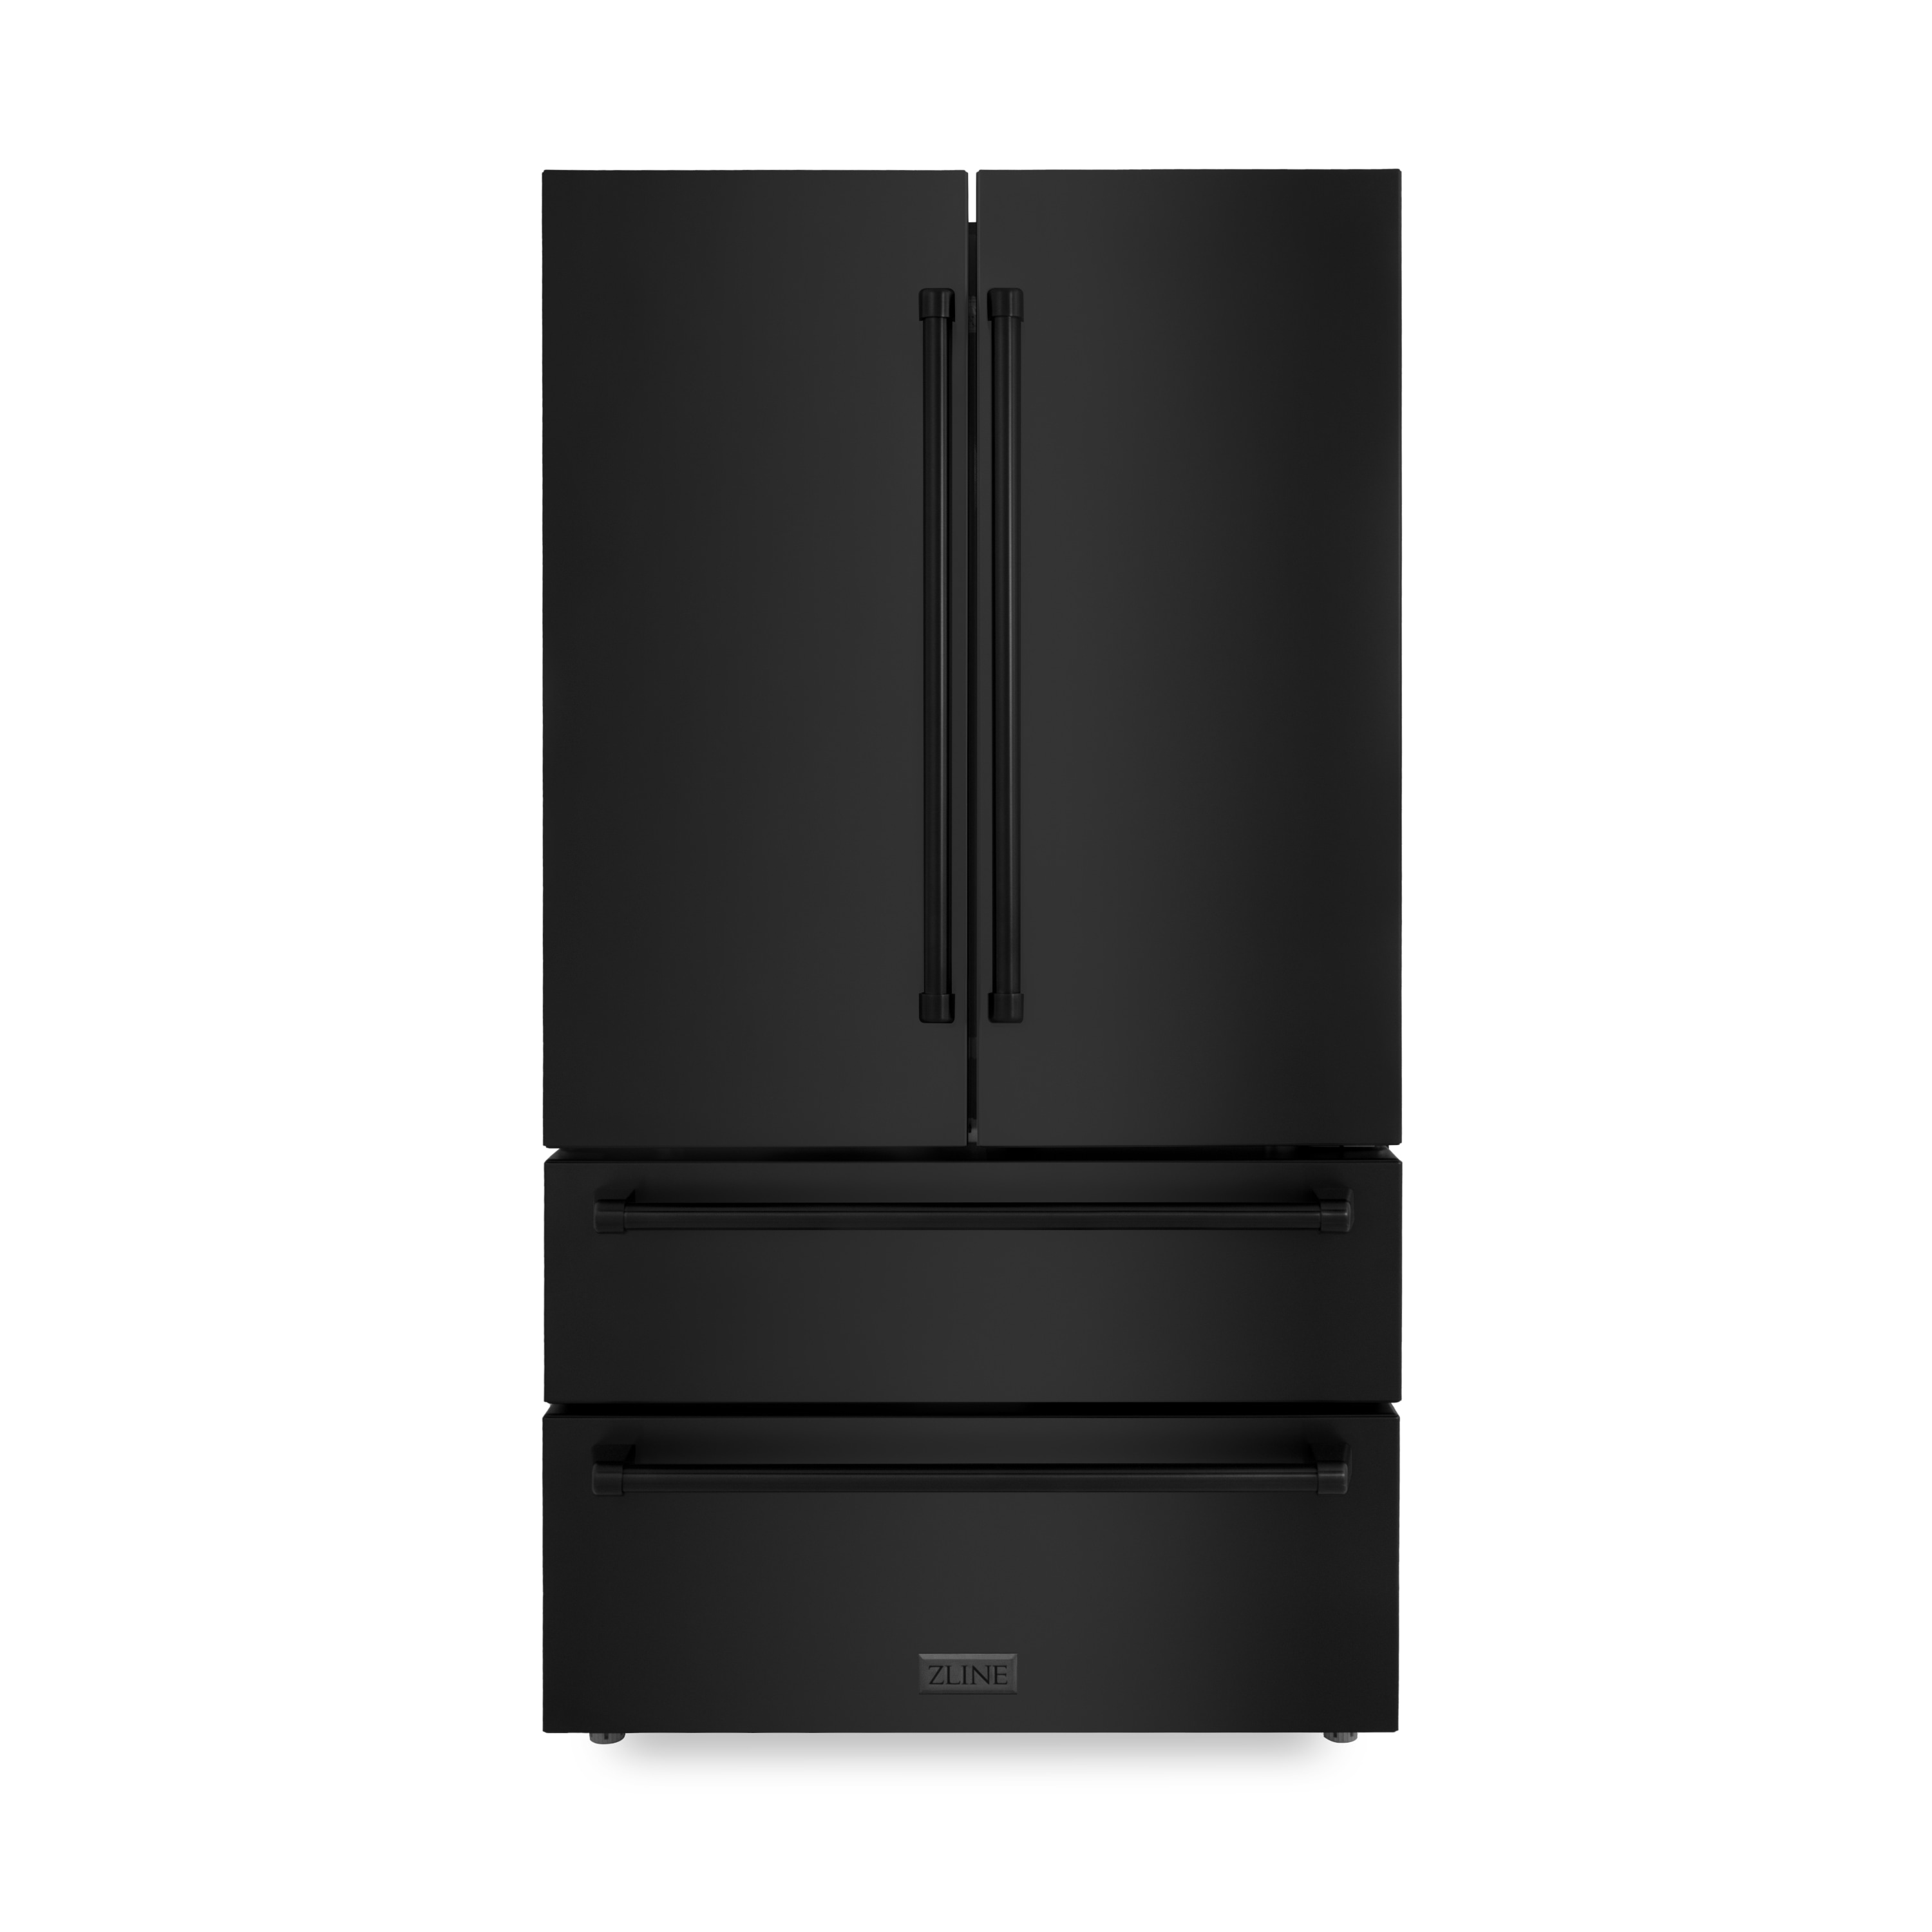 ZLINE 36 inch Autograph Edition 21.6 Cu. ft Freestanding French Door Refrigerator with Water and Ice Dispenser in Fingerprint Resistant Black